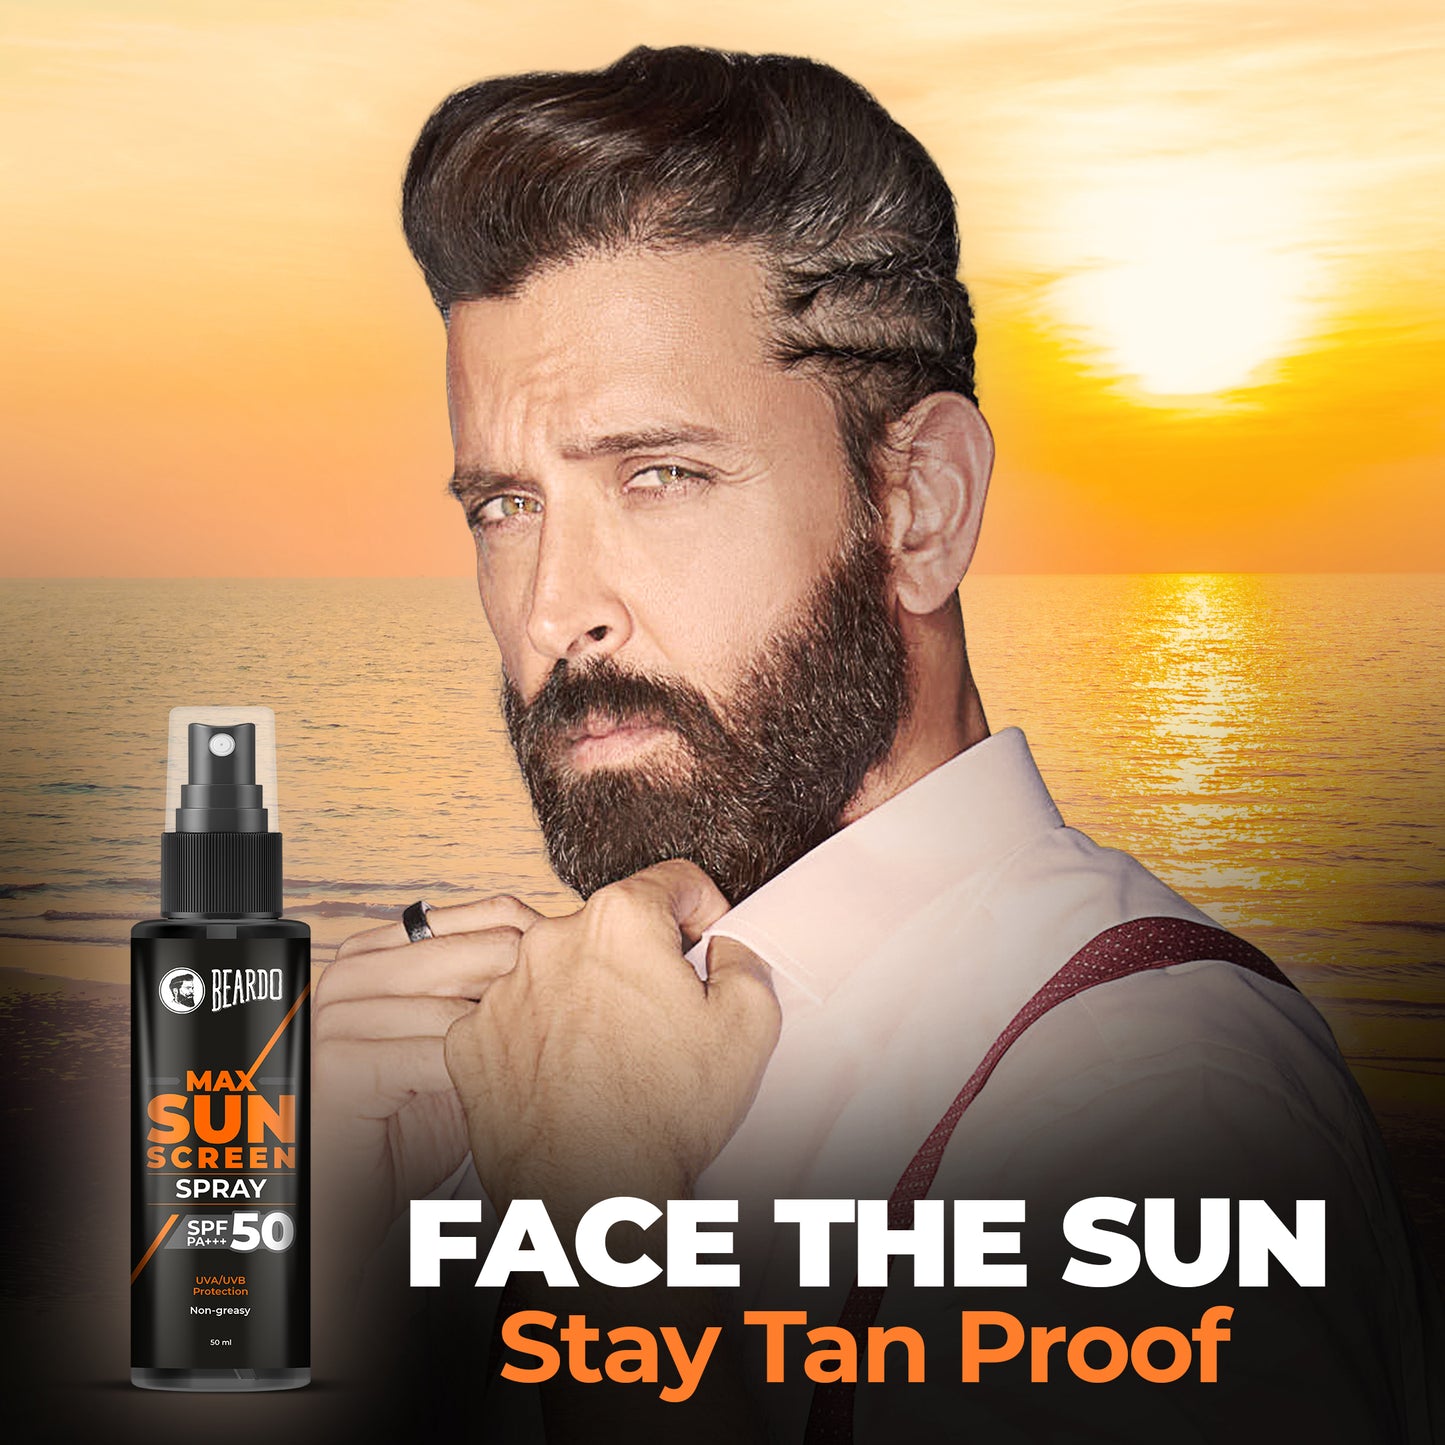 face the sun, stay tan proof